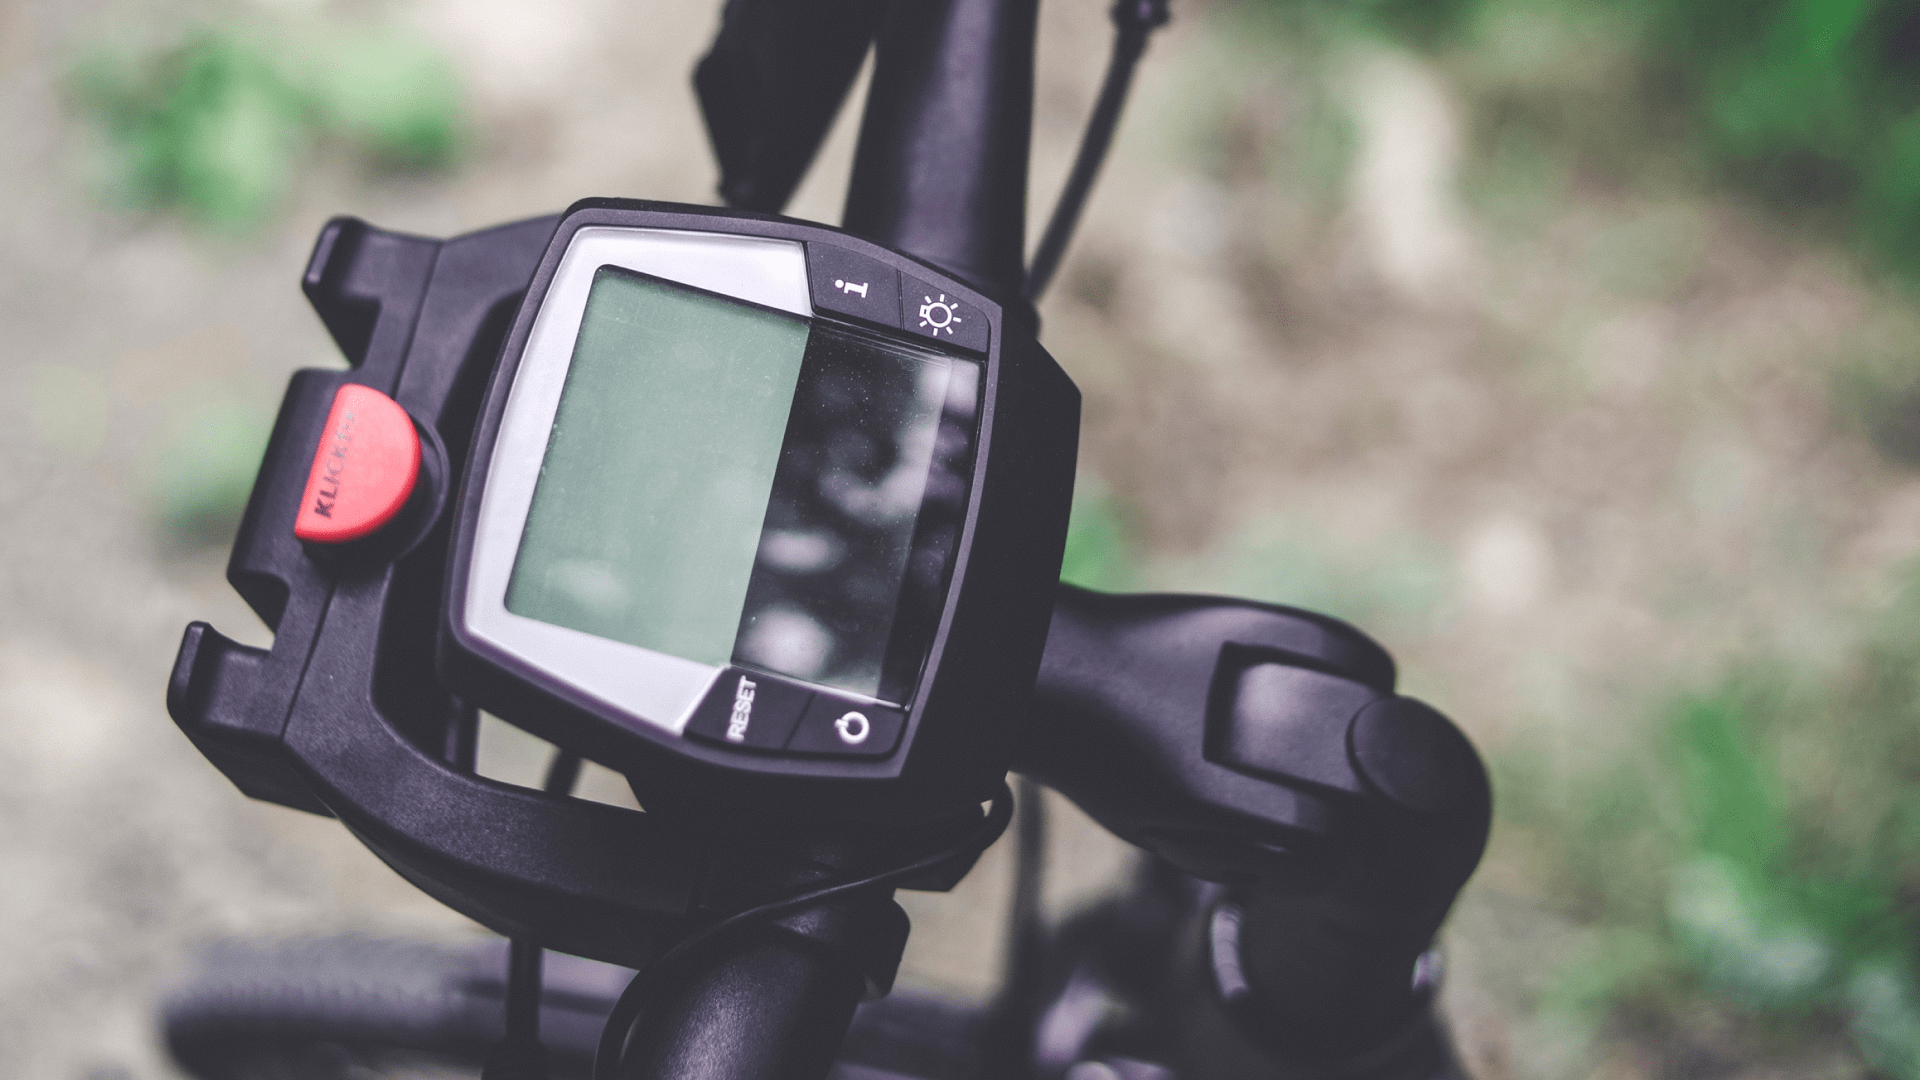 E-bike head units are super useful for monitoring battery & speed